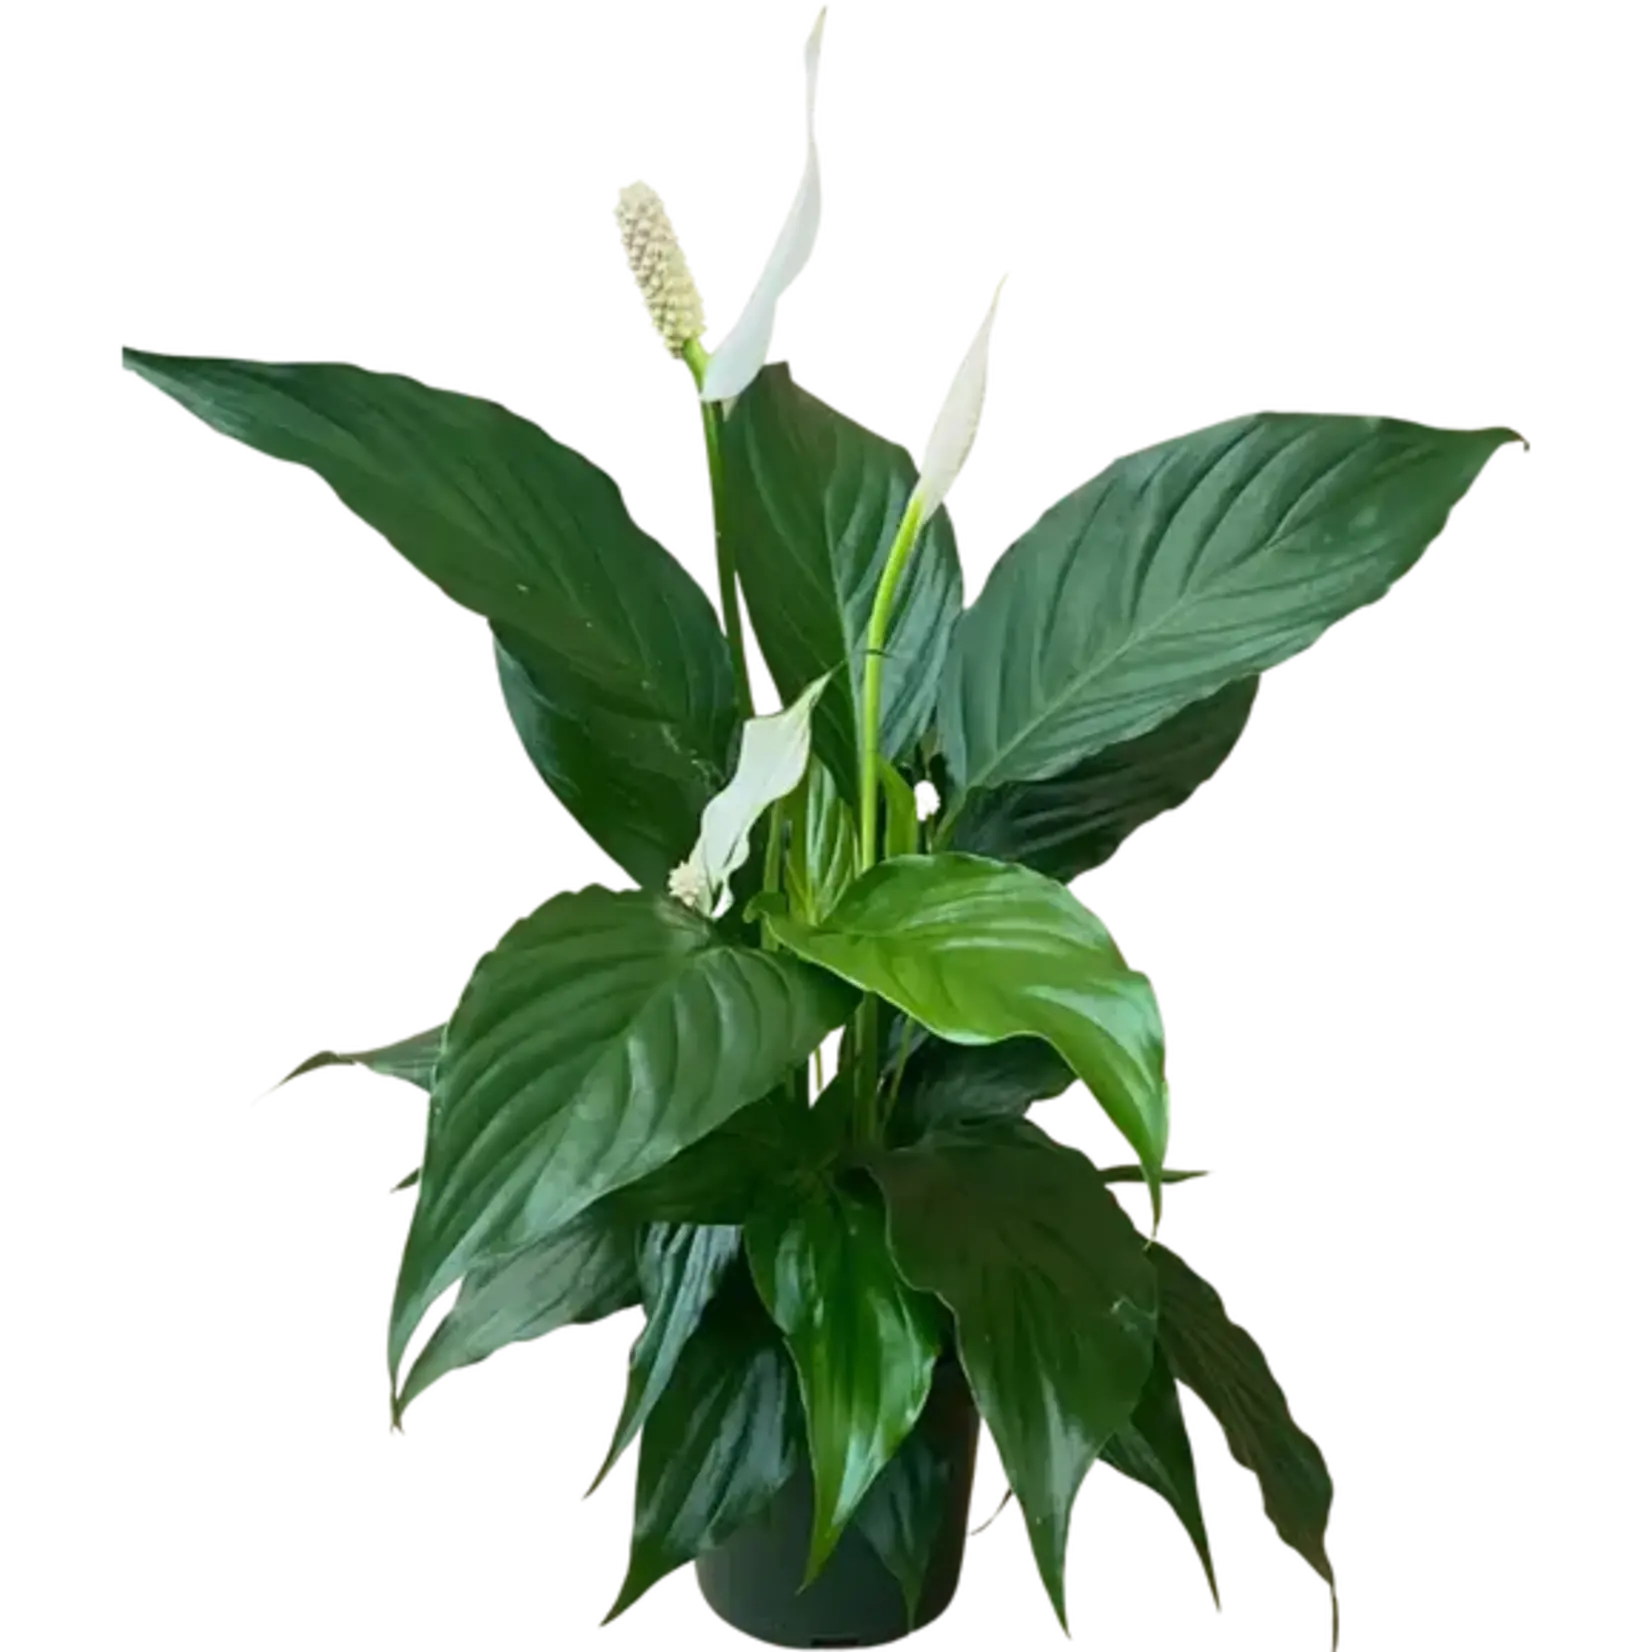 4" Peace Lilly